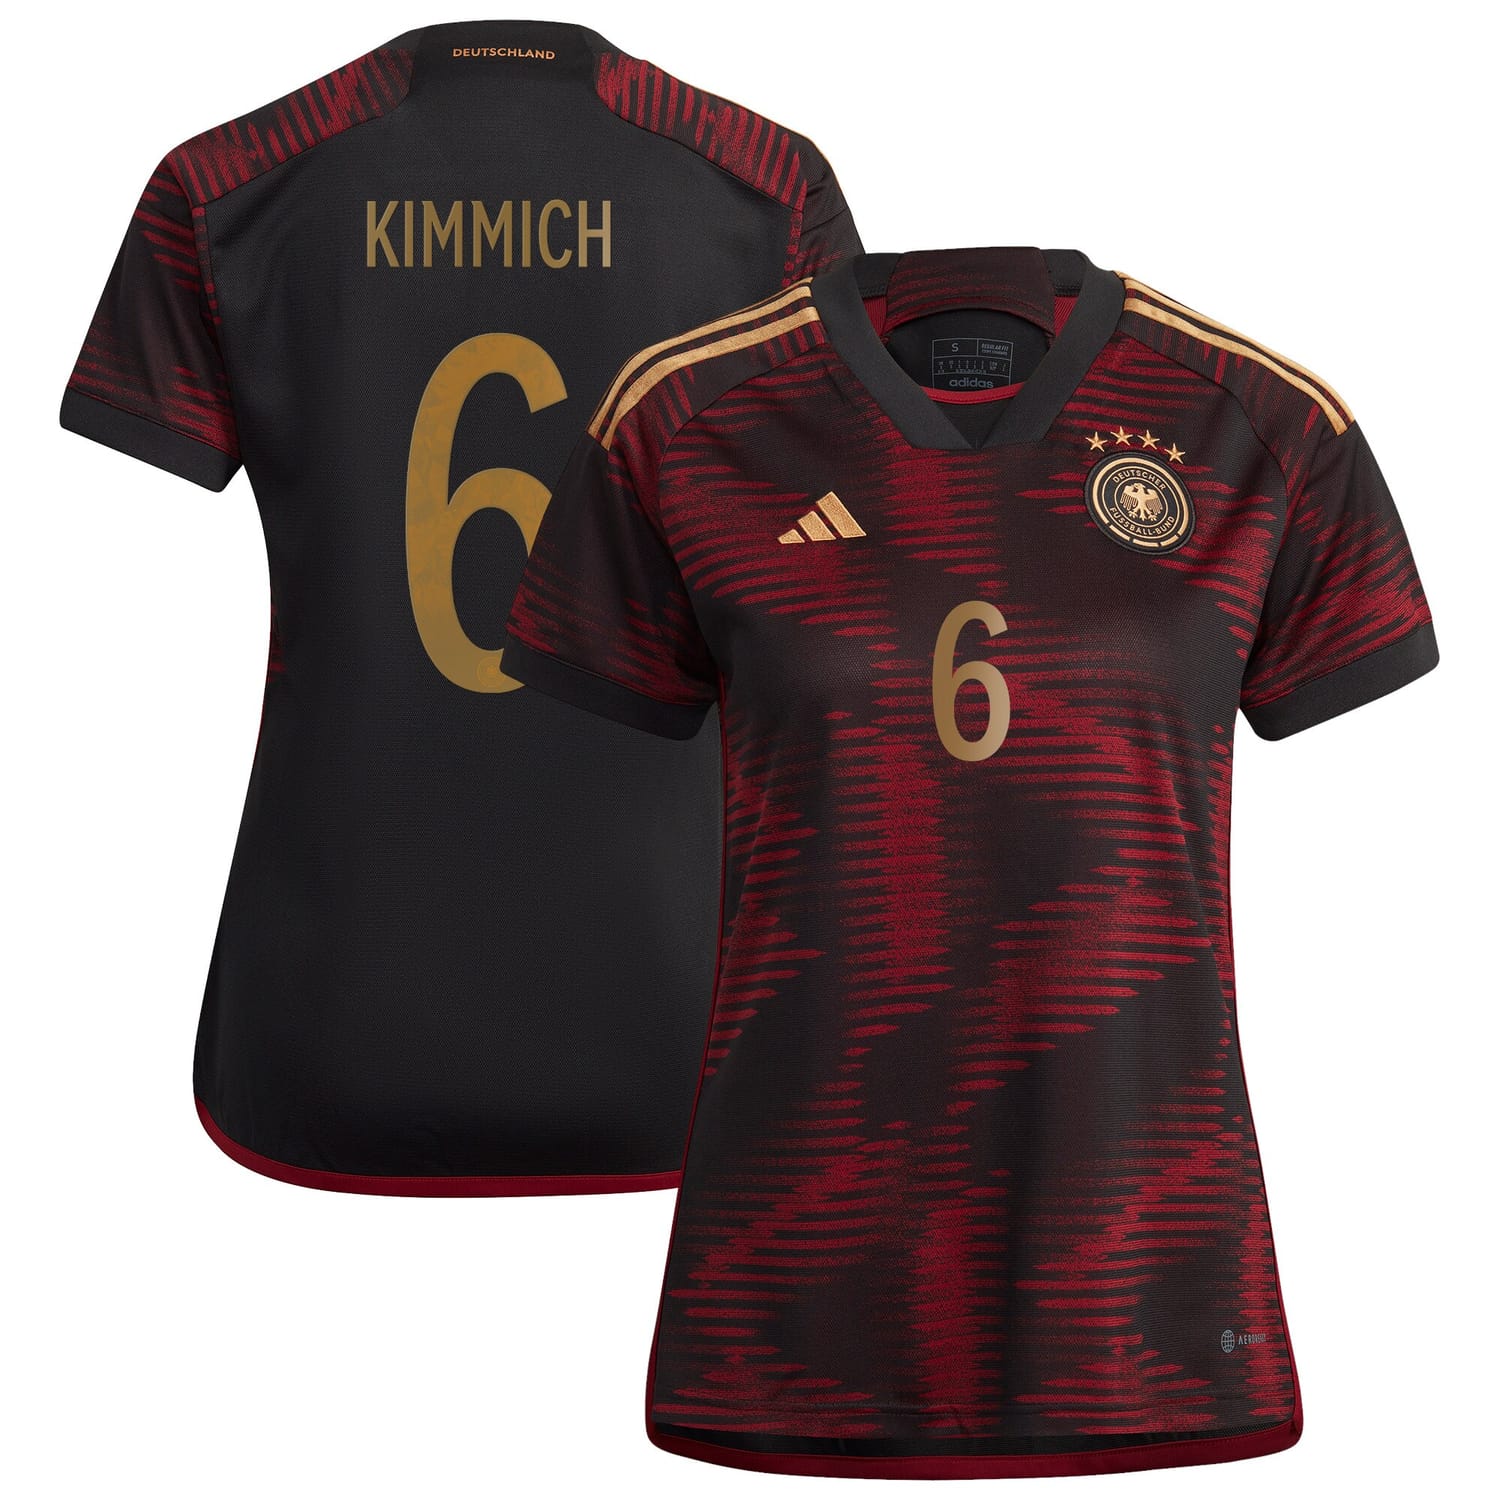 Germany National Team Away Jersey Shirt player Joshua Kimmich 6 printing for Women